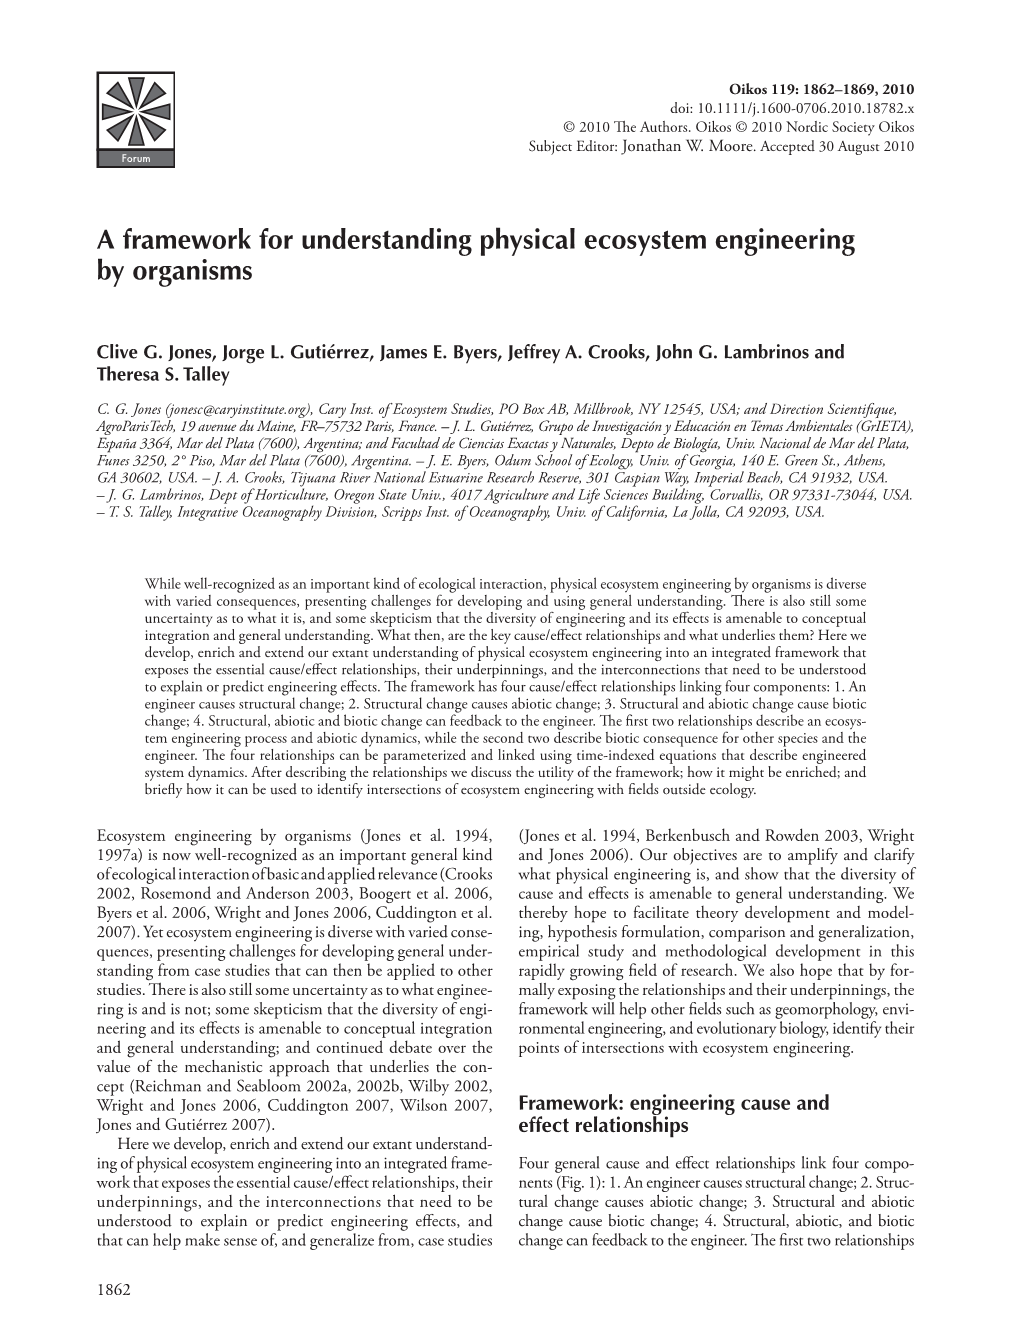 A Framework for Understanding Physical Ecosystem Engineering by Organisms